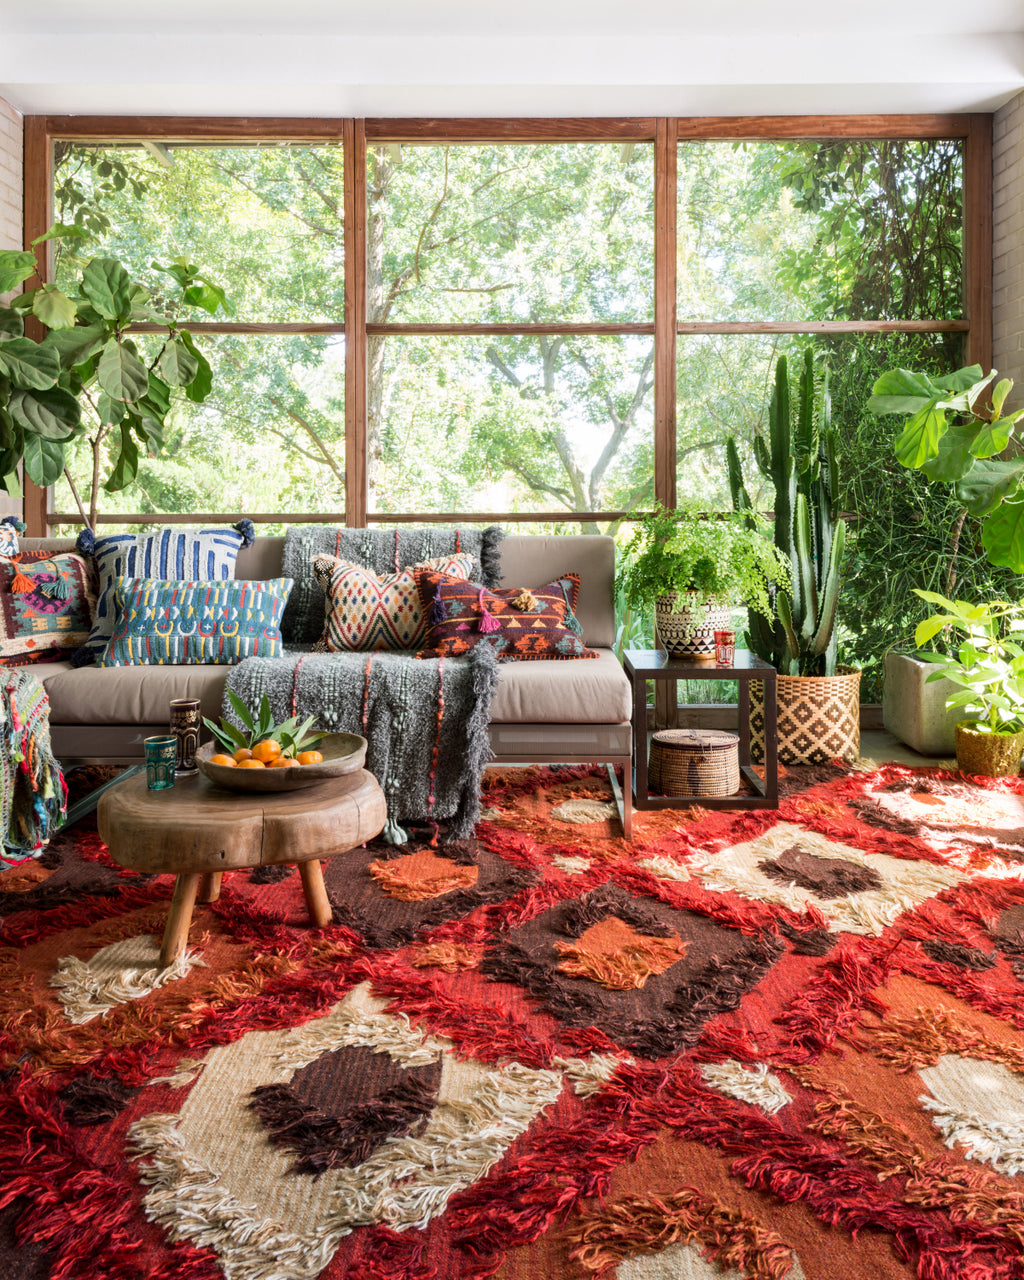 Loloi Fable FD-05 Spice Area Rug by Justina Blakeney Roomscene Feature